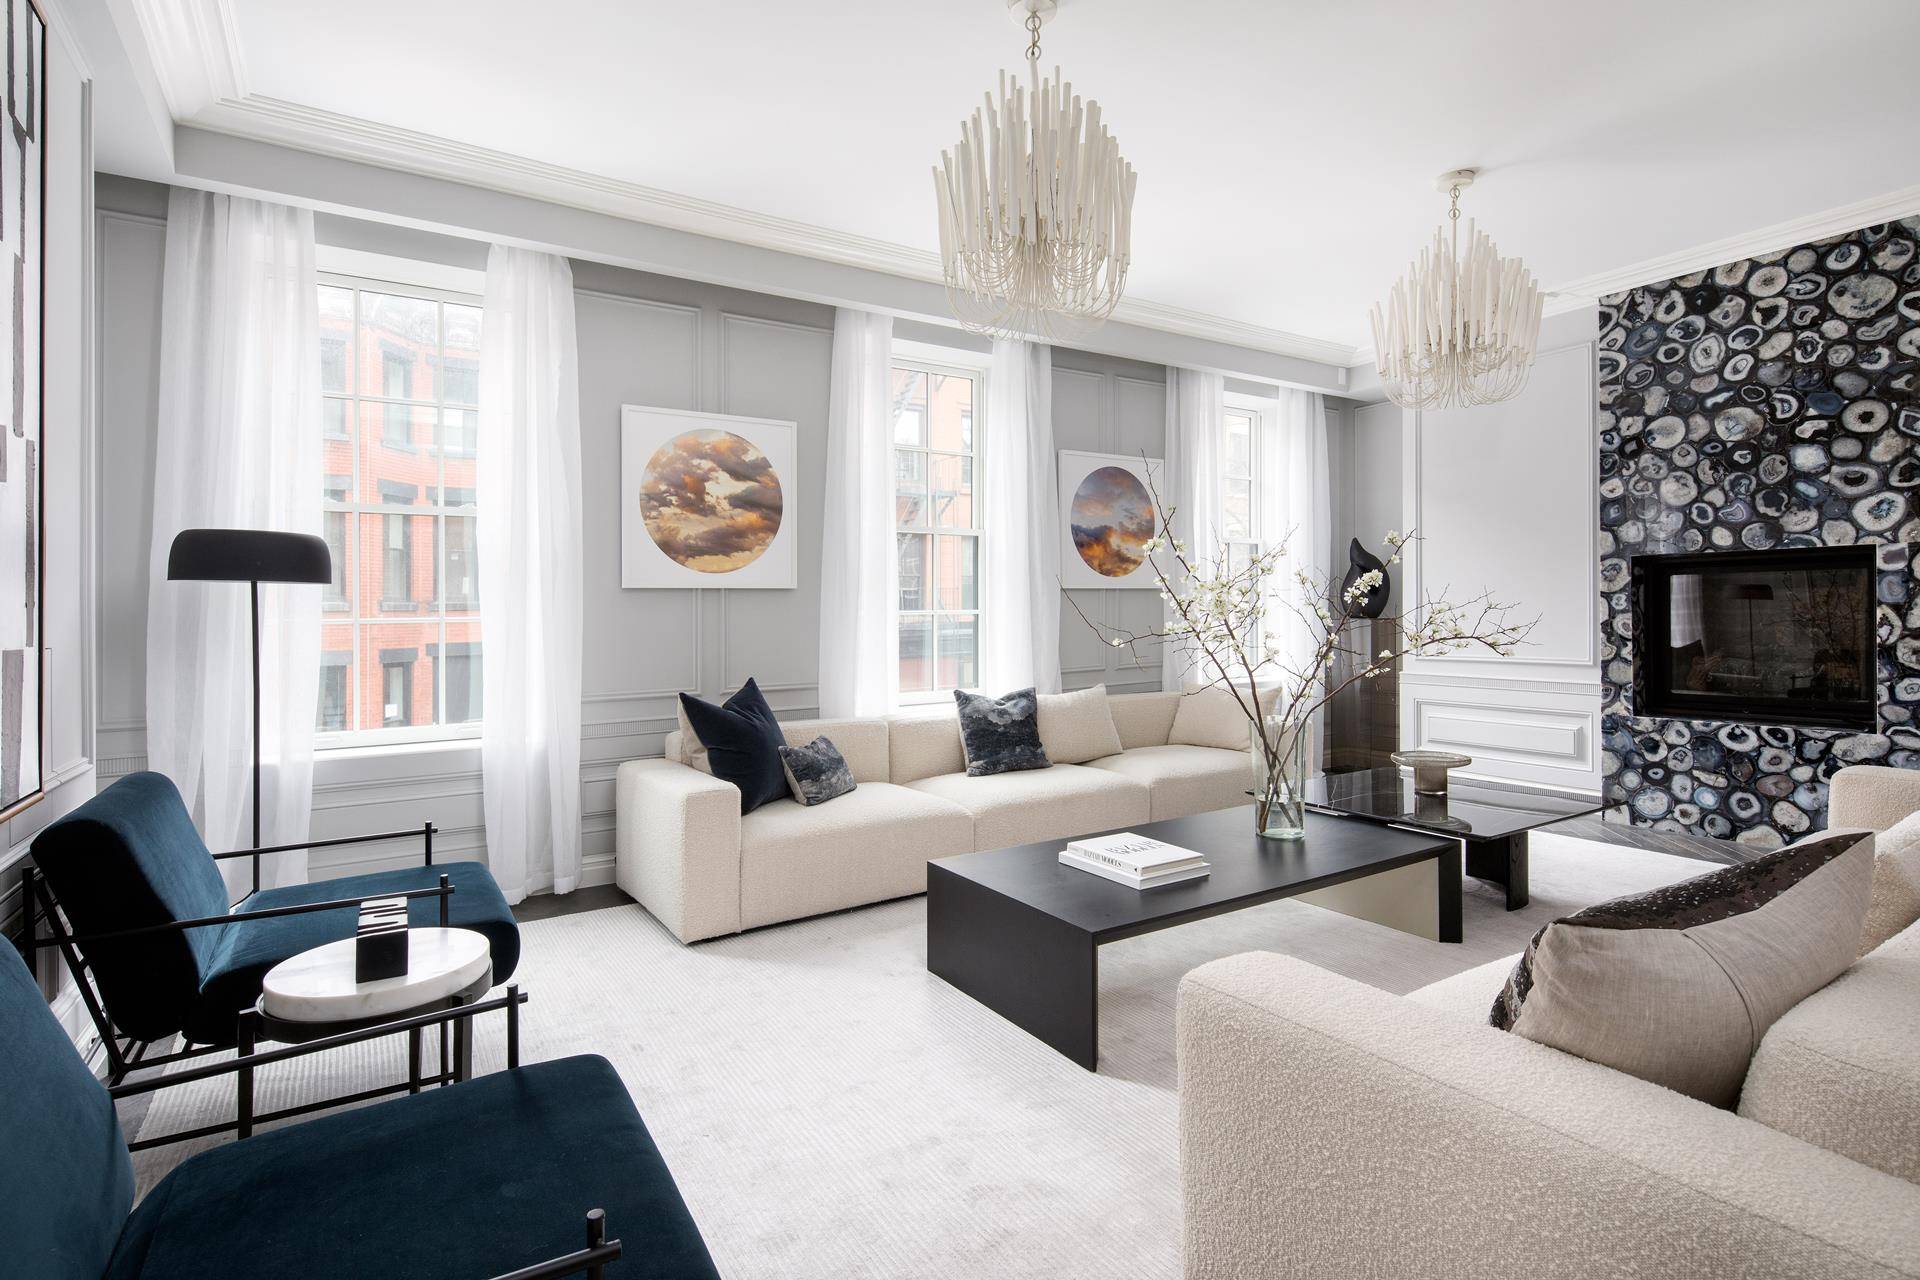 Breathtaking design meets elegant luxury in this thoroughly gut renovated, jaw dropping, five floor townhouse in prime Brooklyn Heights.